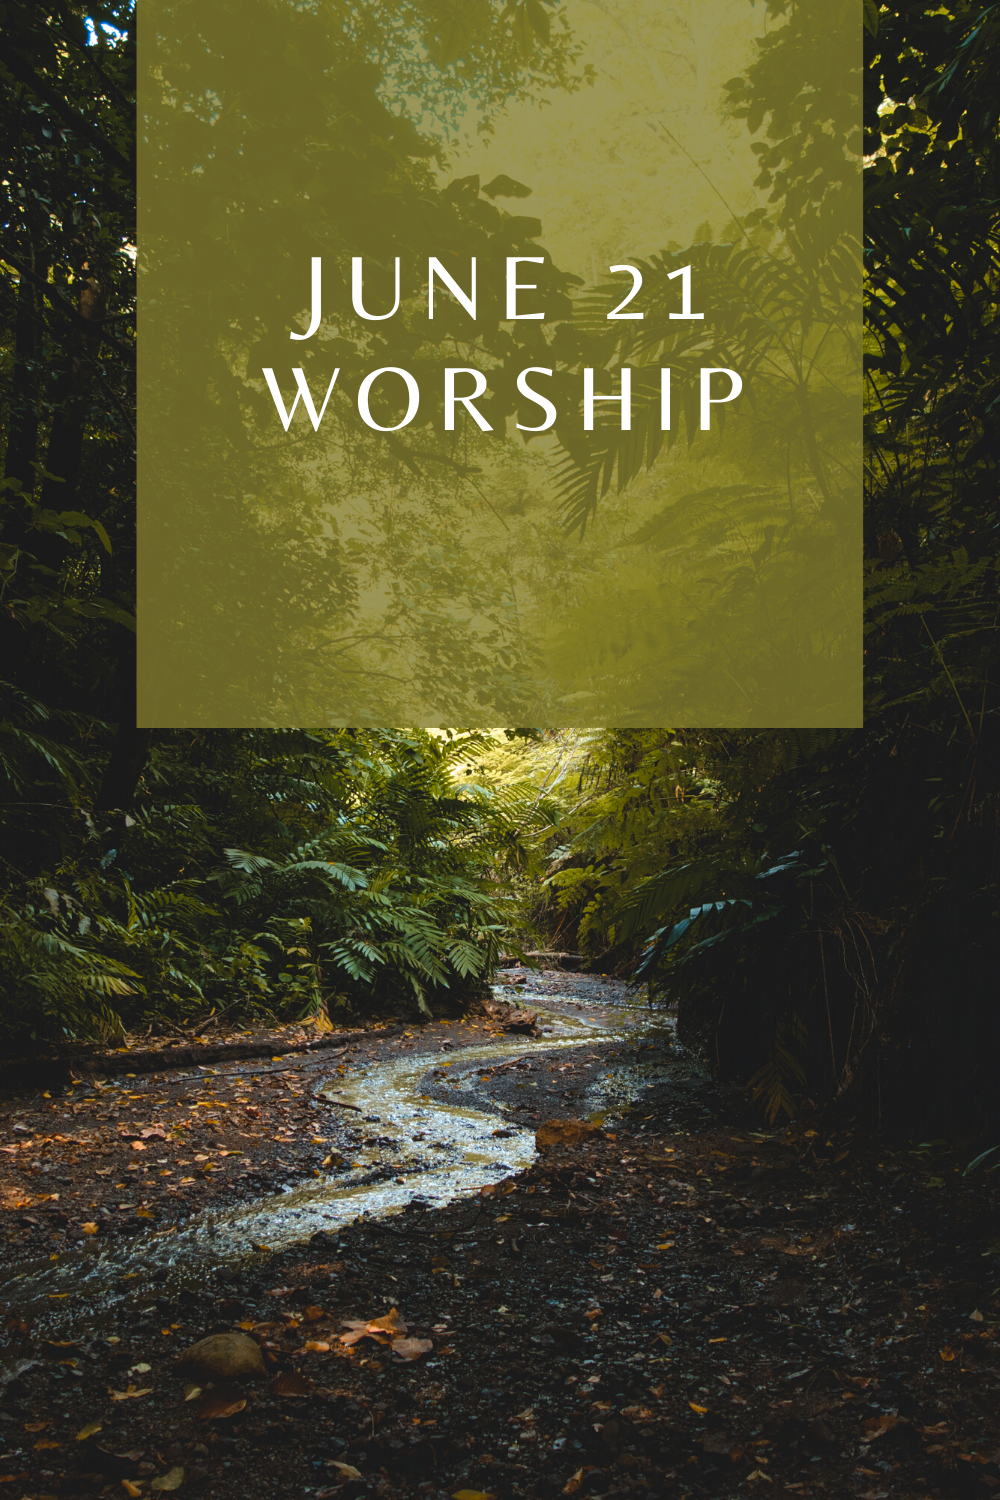 JUne 21 worship service feature image